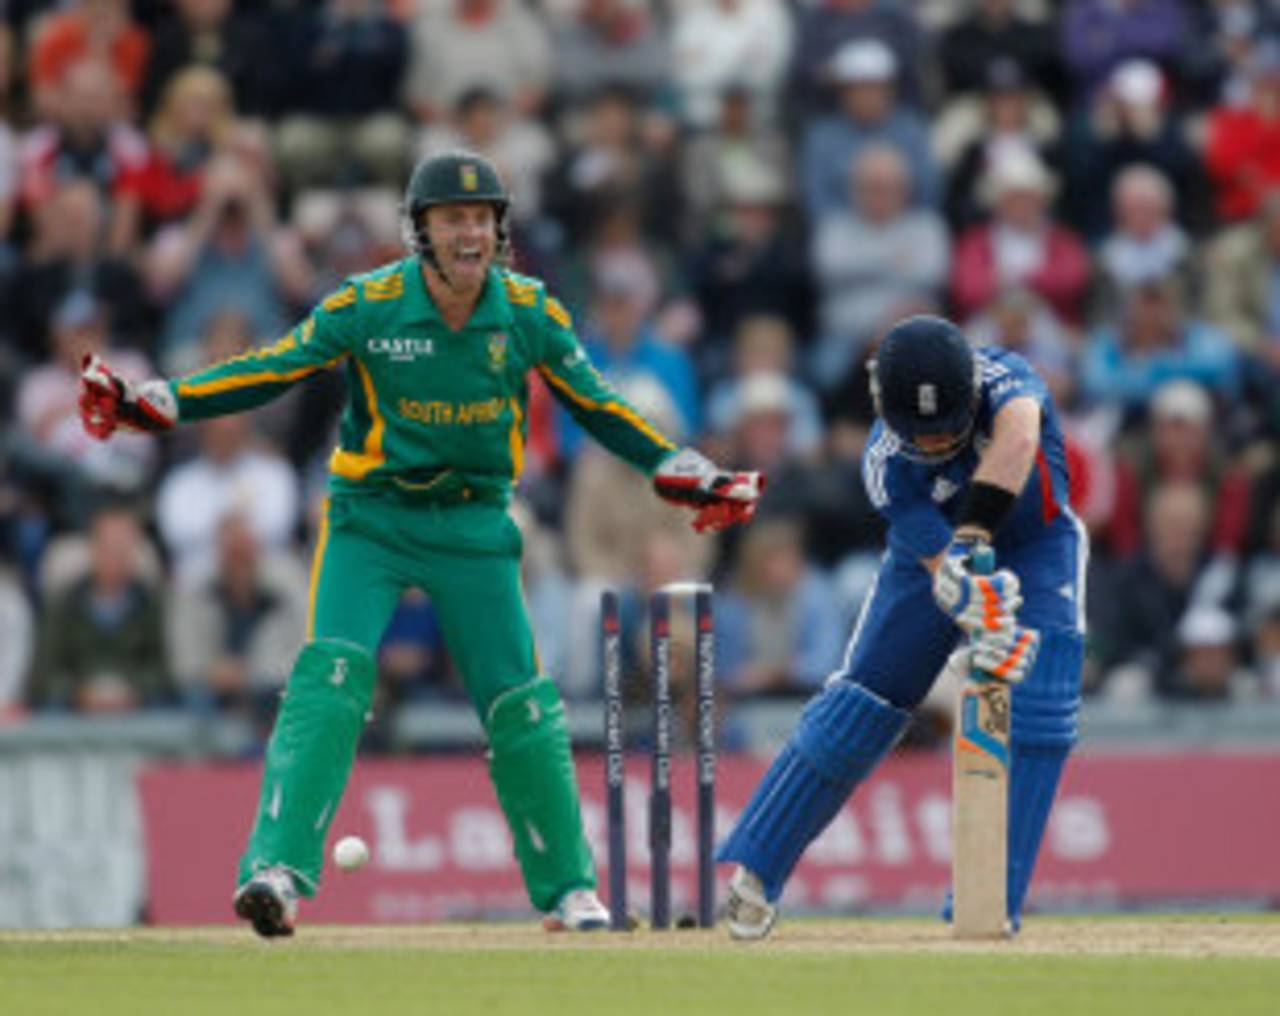 Ian Bell was bowled by a Robin Peterson turner, England v South Africa, 2nd NatWest ODI, West End, August 28, 2012